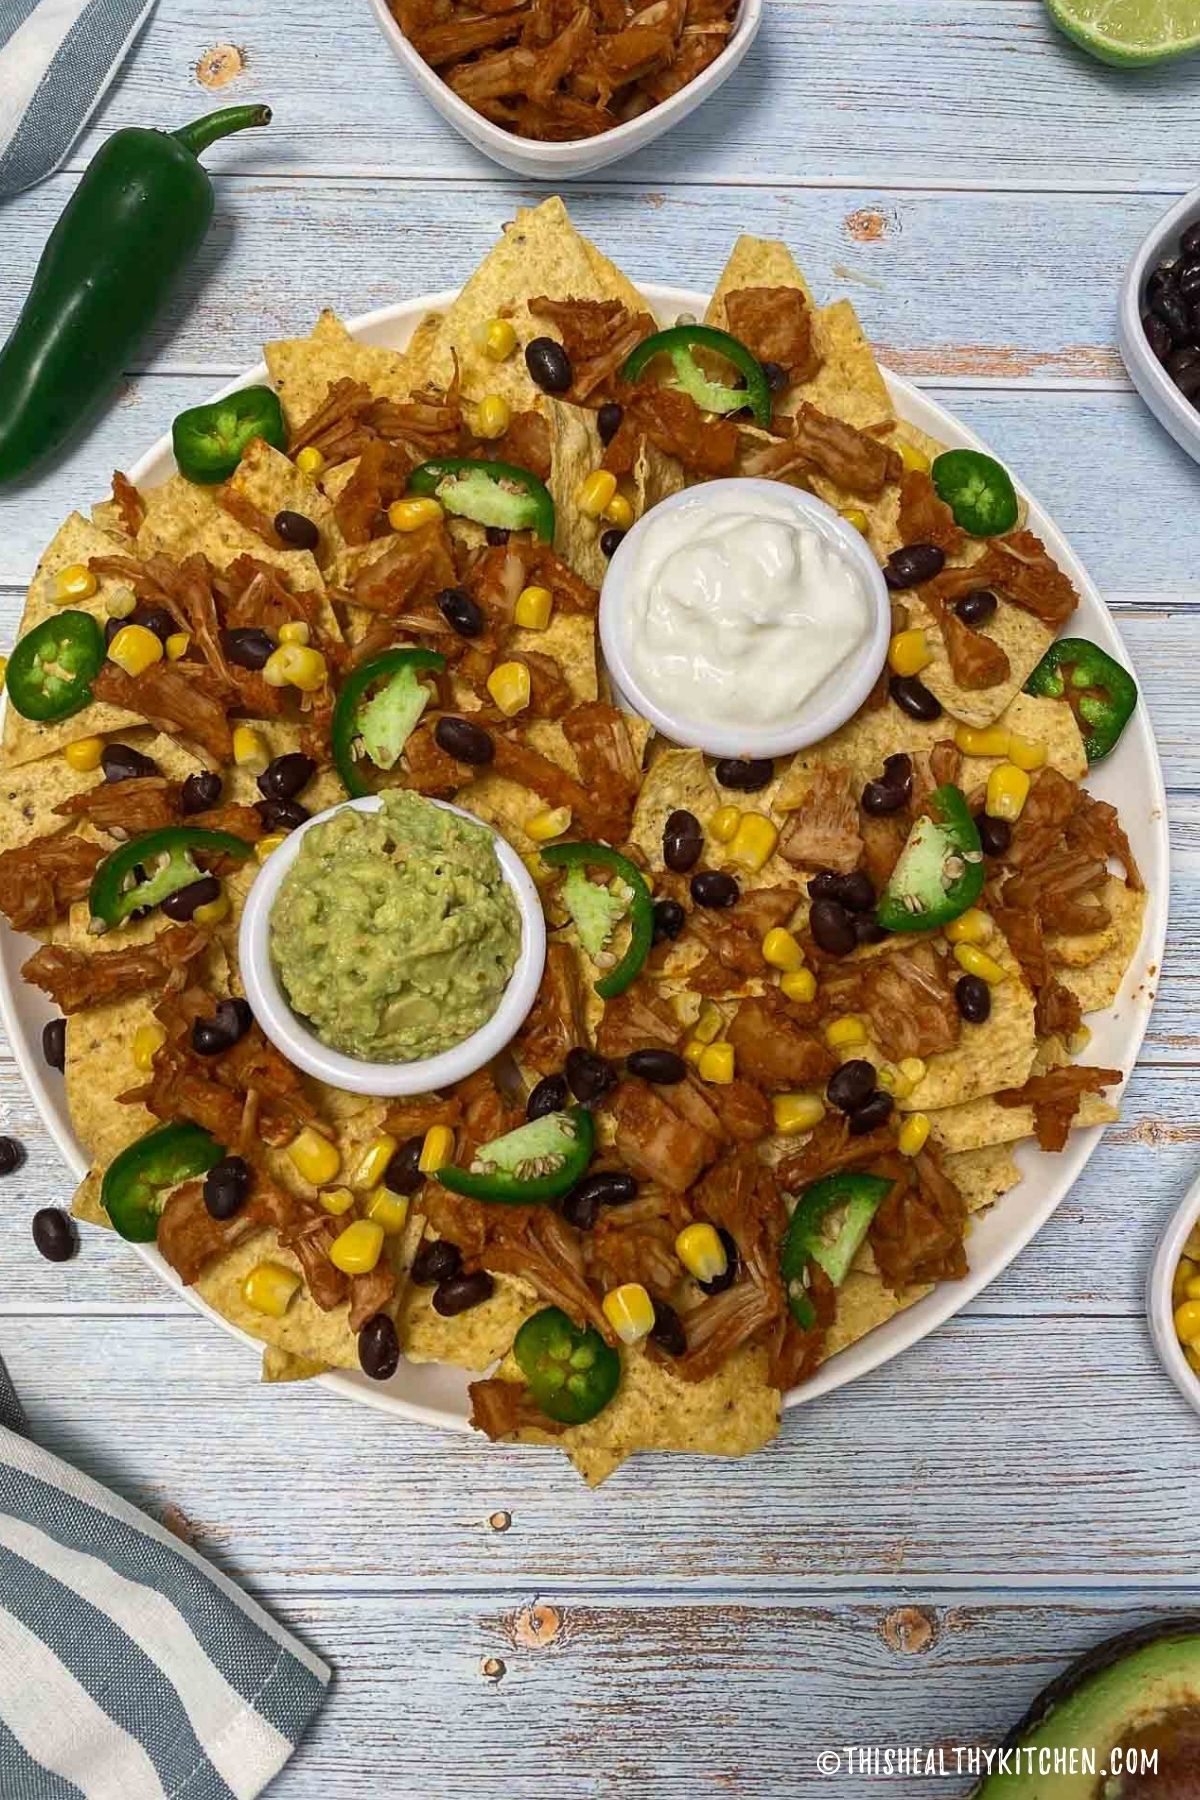 Platter of nachos with guacamole and sour cream for dipping.